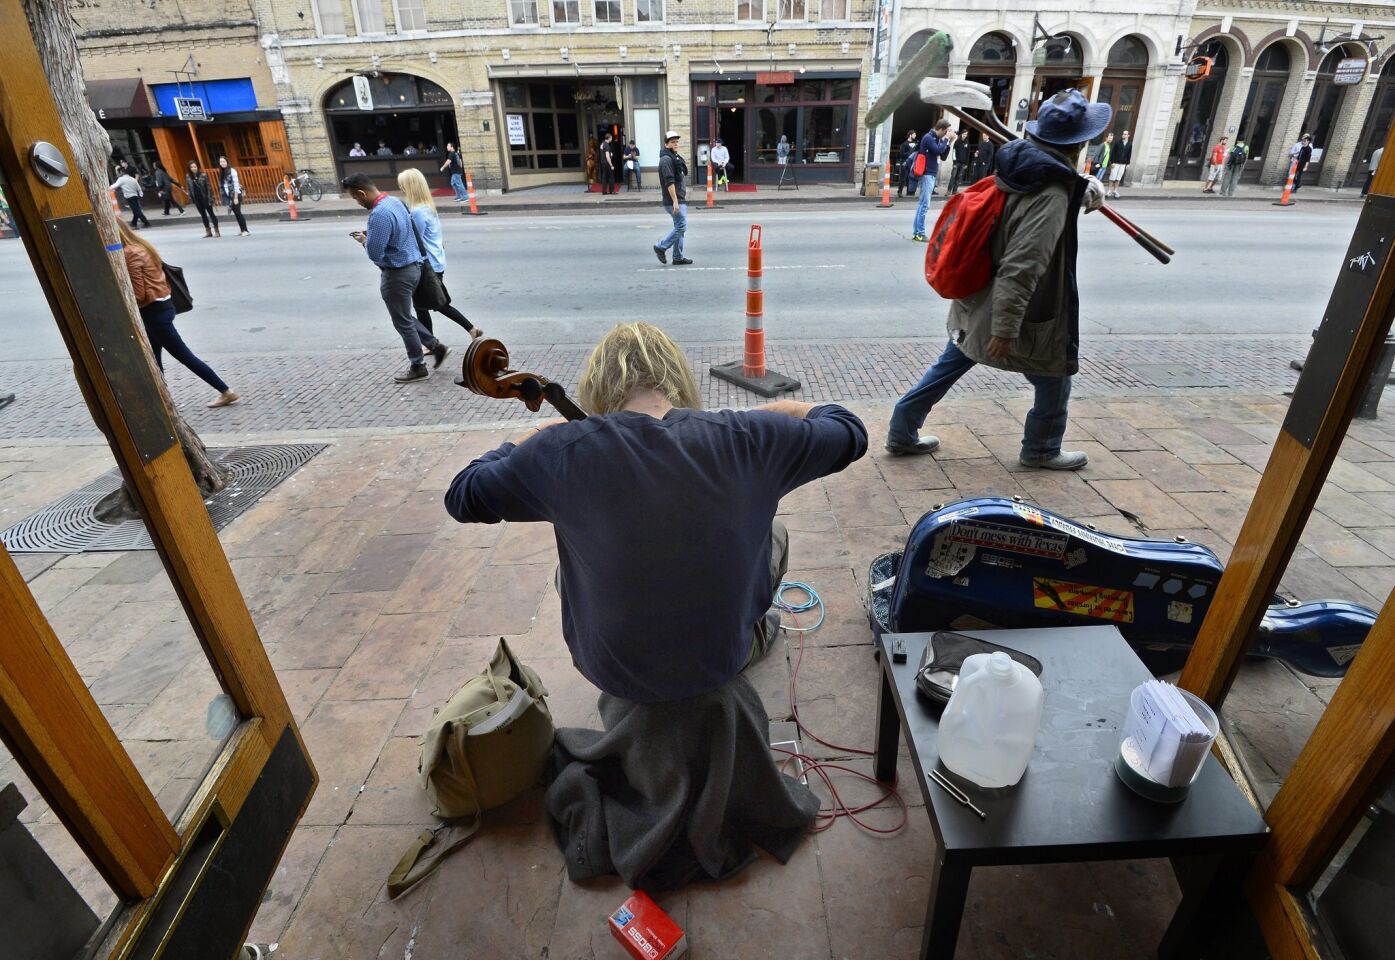 Martin Watkinson plays the cello on the sidewalk on the first official day of South by Southwest in Austin, Texas.